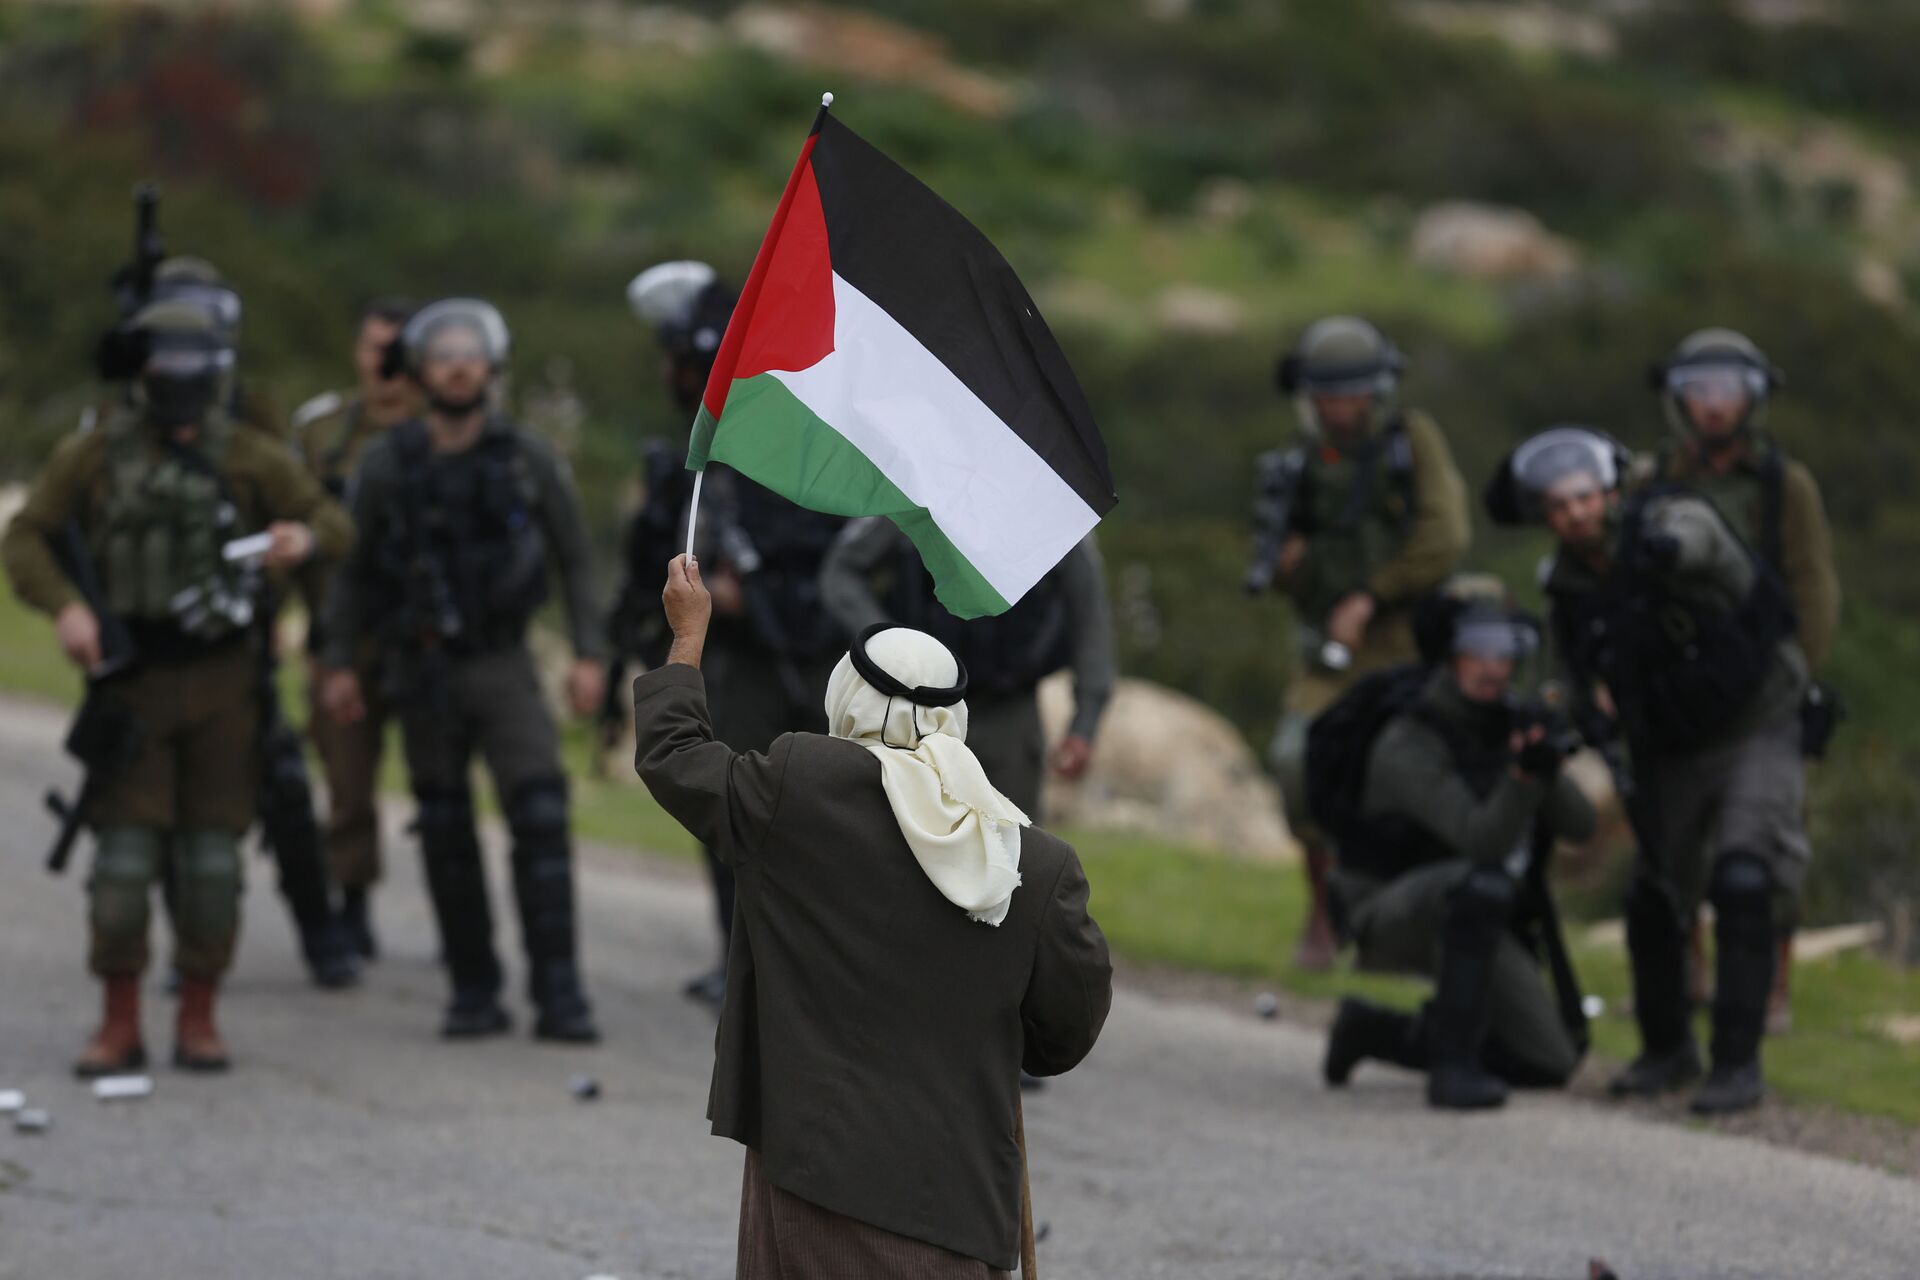 A Palestinian demonstrator holds a national flags in front of Israeli forces as they protest against President Donald Trump's Mideast initiative, in Jordan Valley in the West Bank, Tuesday, Feb. 25, 2020 - Sputnik International, 1920, 19.07.2022